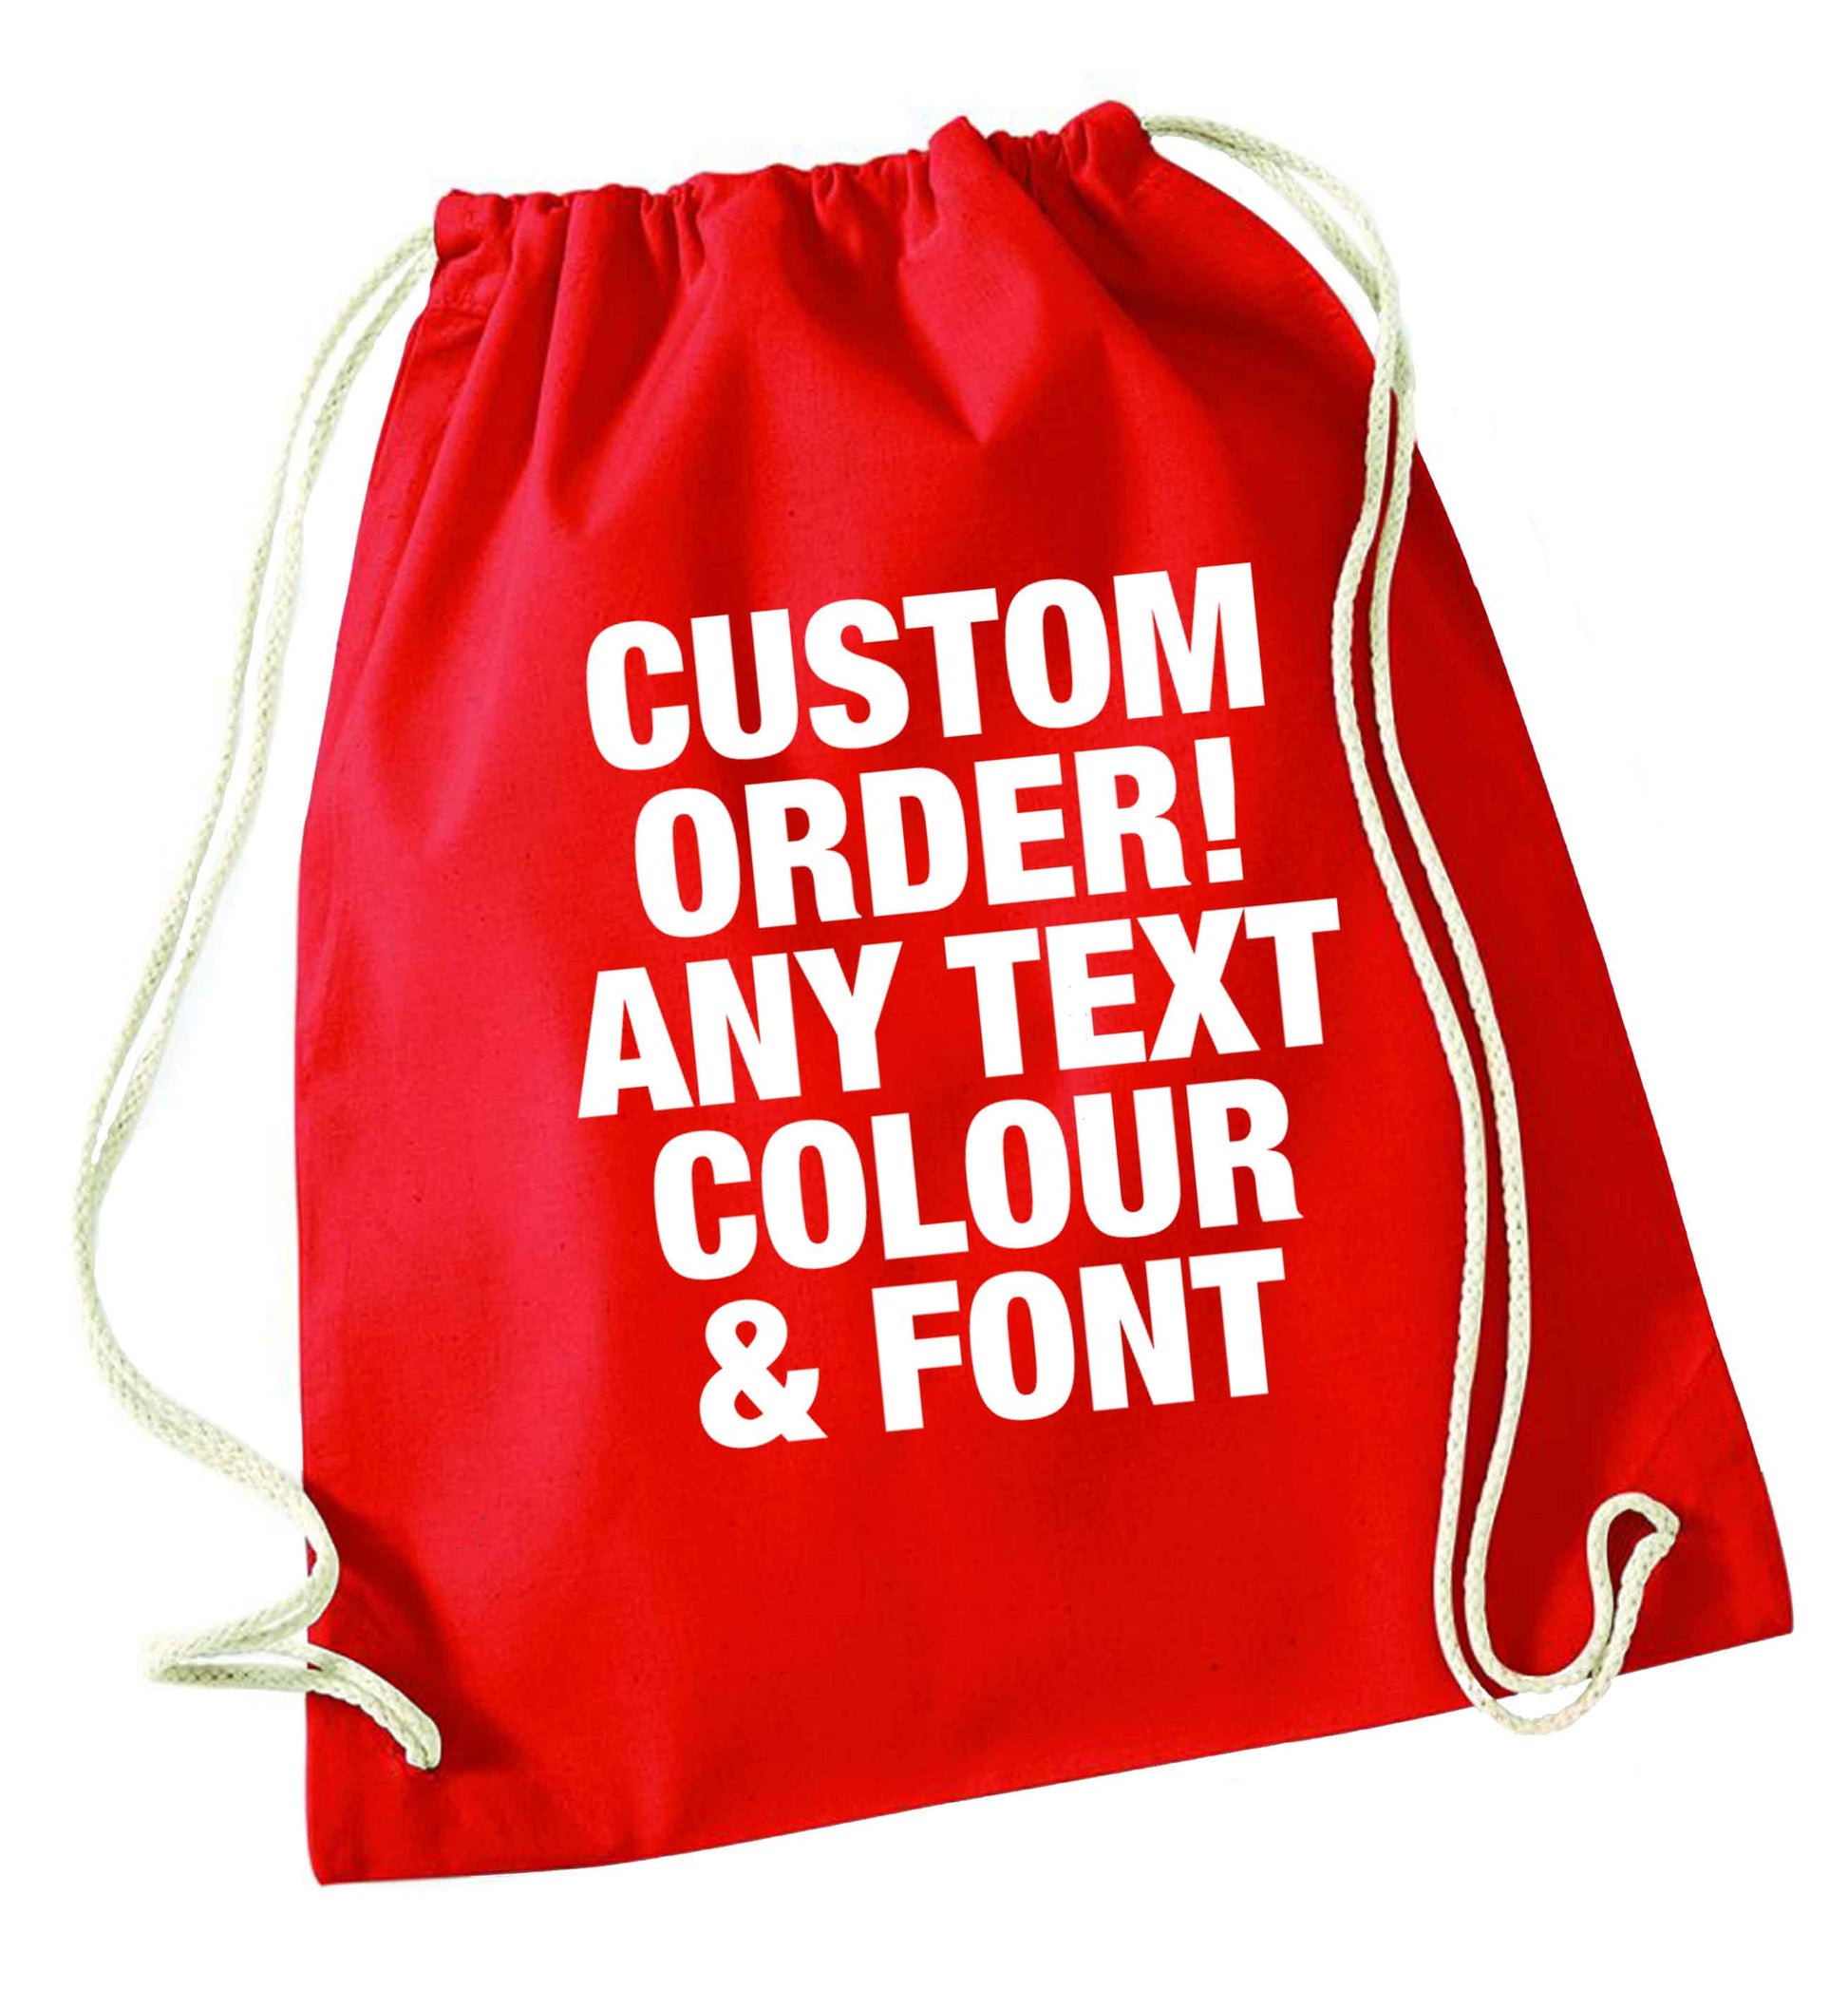 Custom order any text colour and font red drawstring bag 